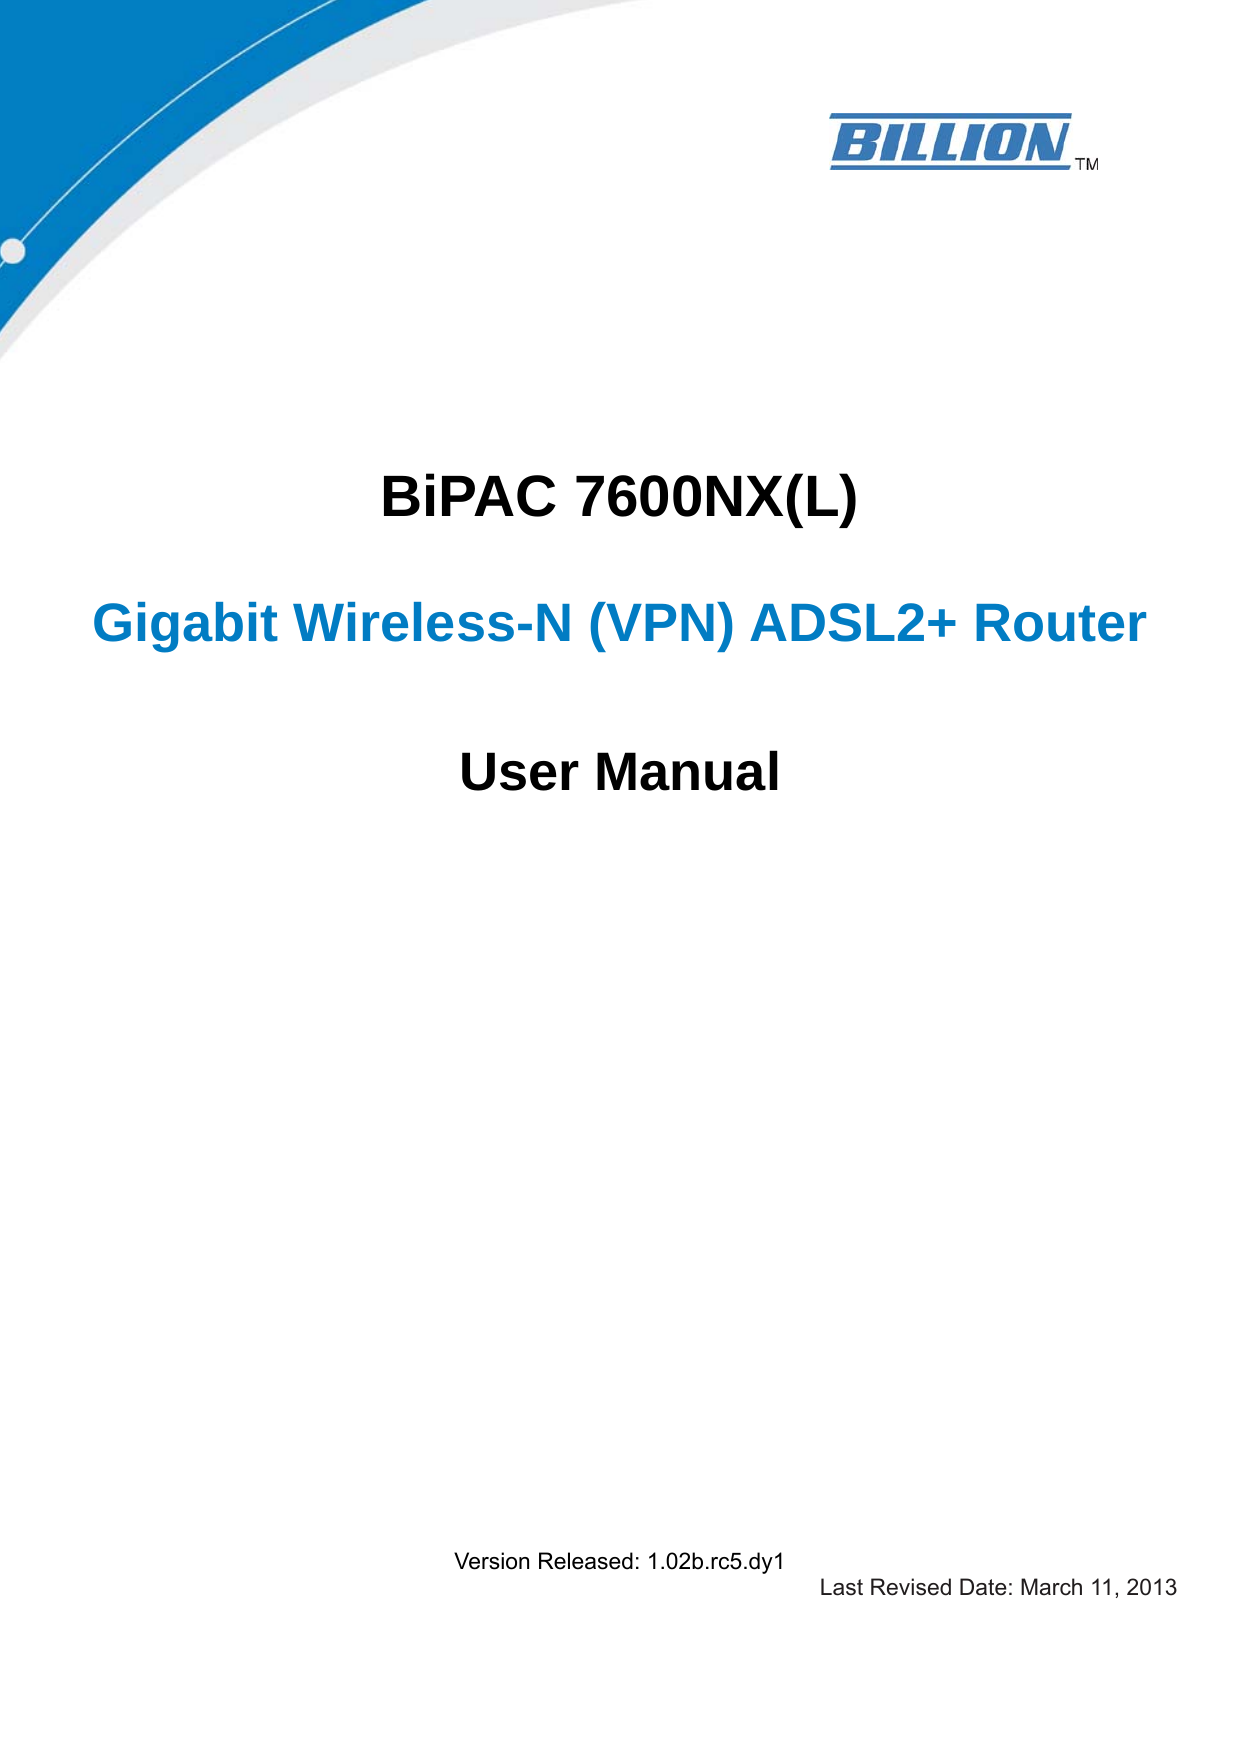     BiPAC 7600NX(L)  Gigabit Wireless-N (VPN) ADSL2+ Router  User Manual                          Version Released: 1.02b.rc5.dy1 Last Revised Date: March 11, 2013 